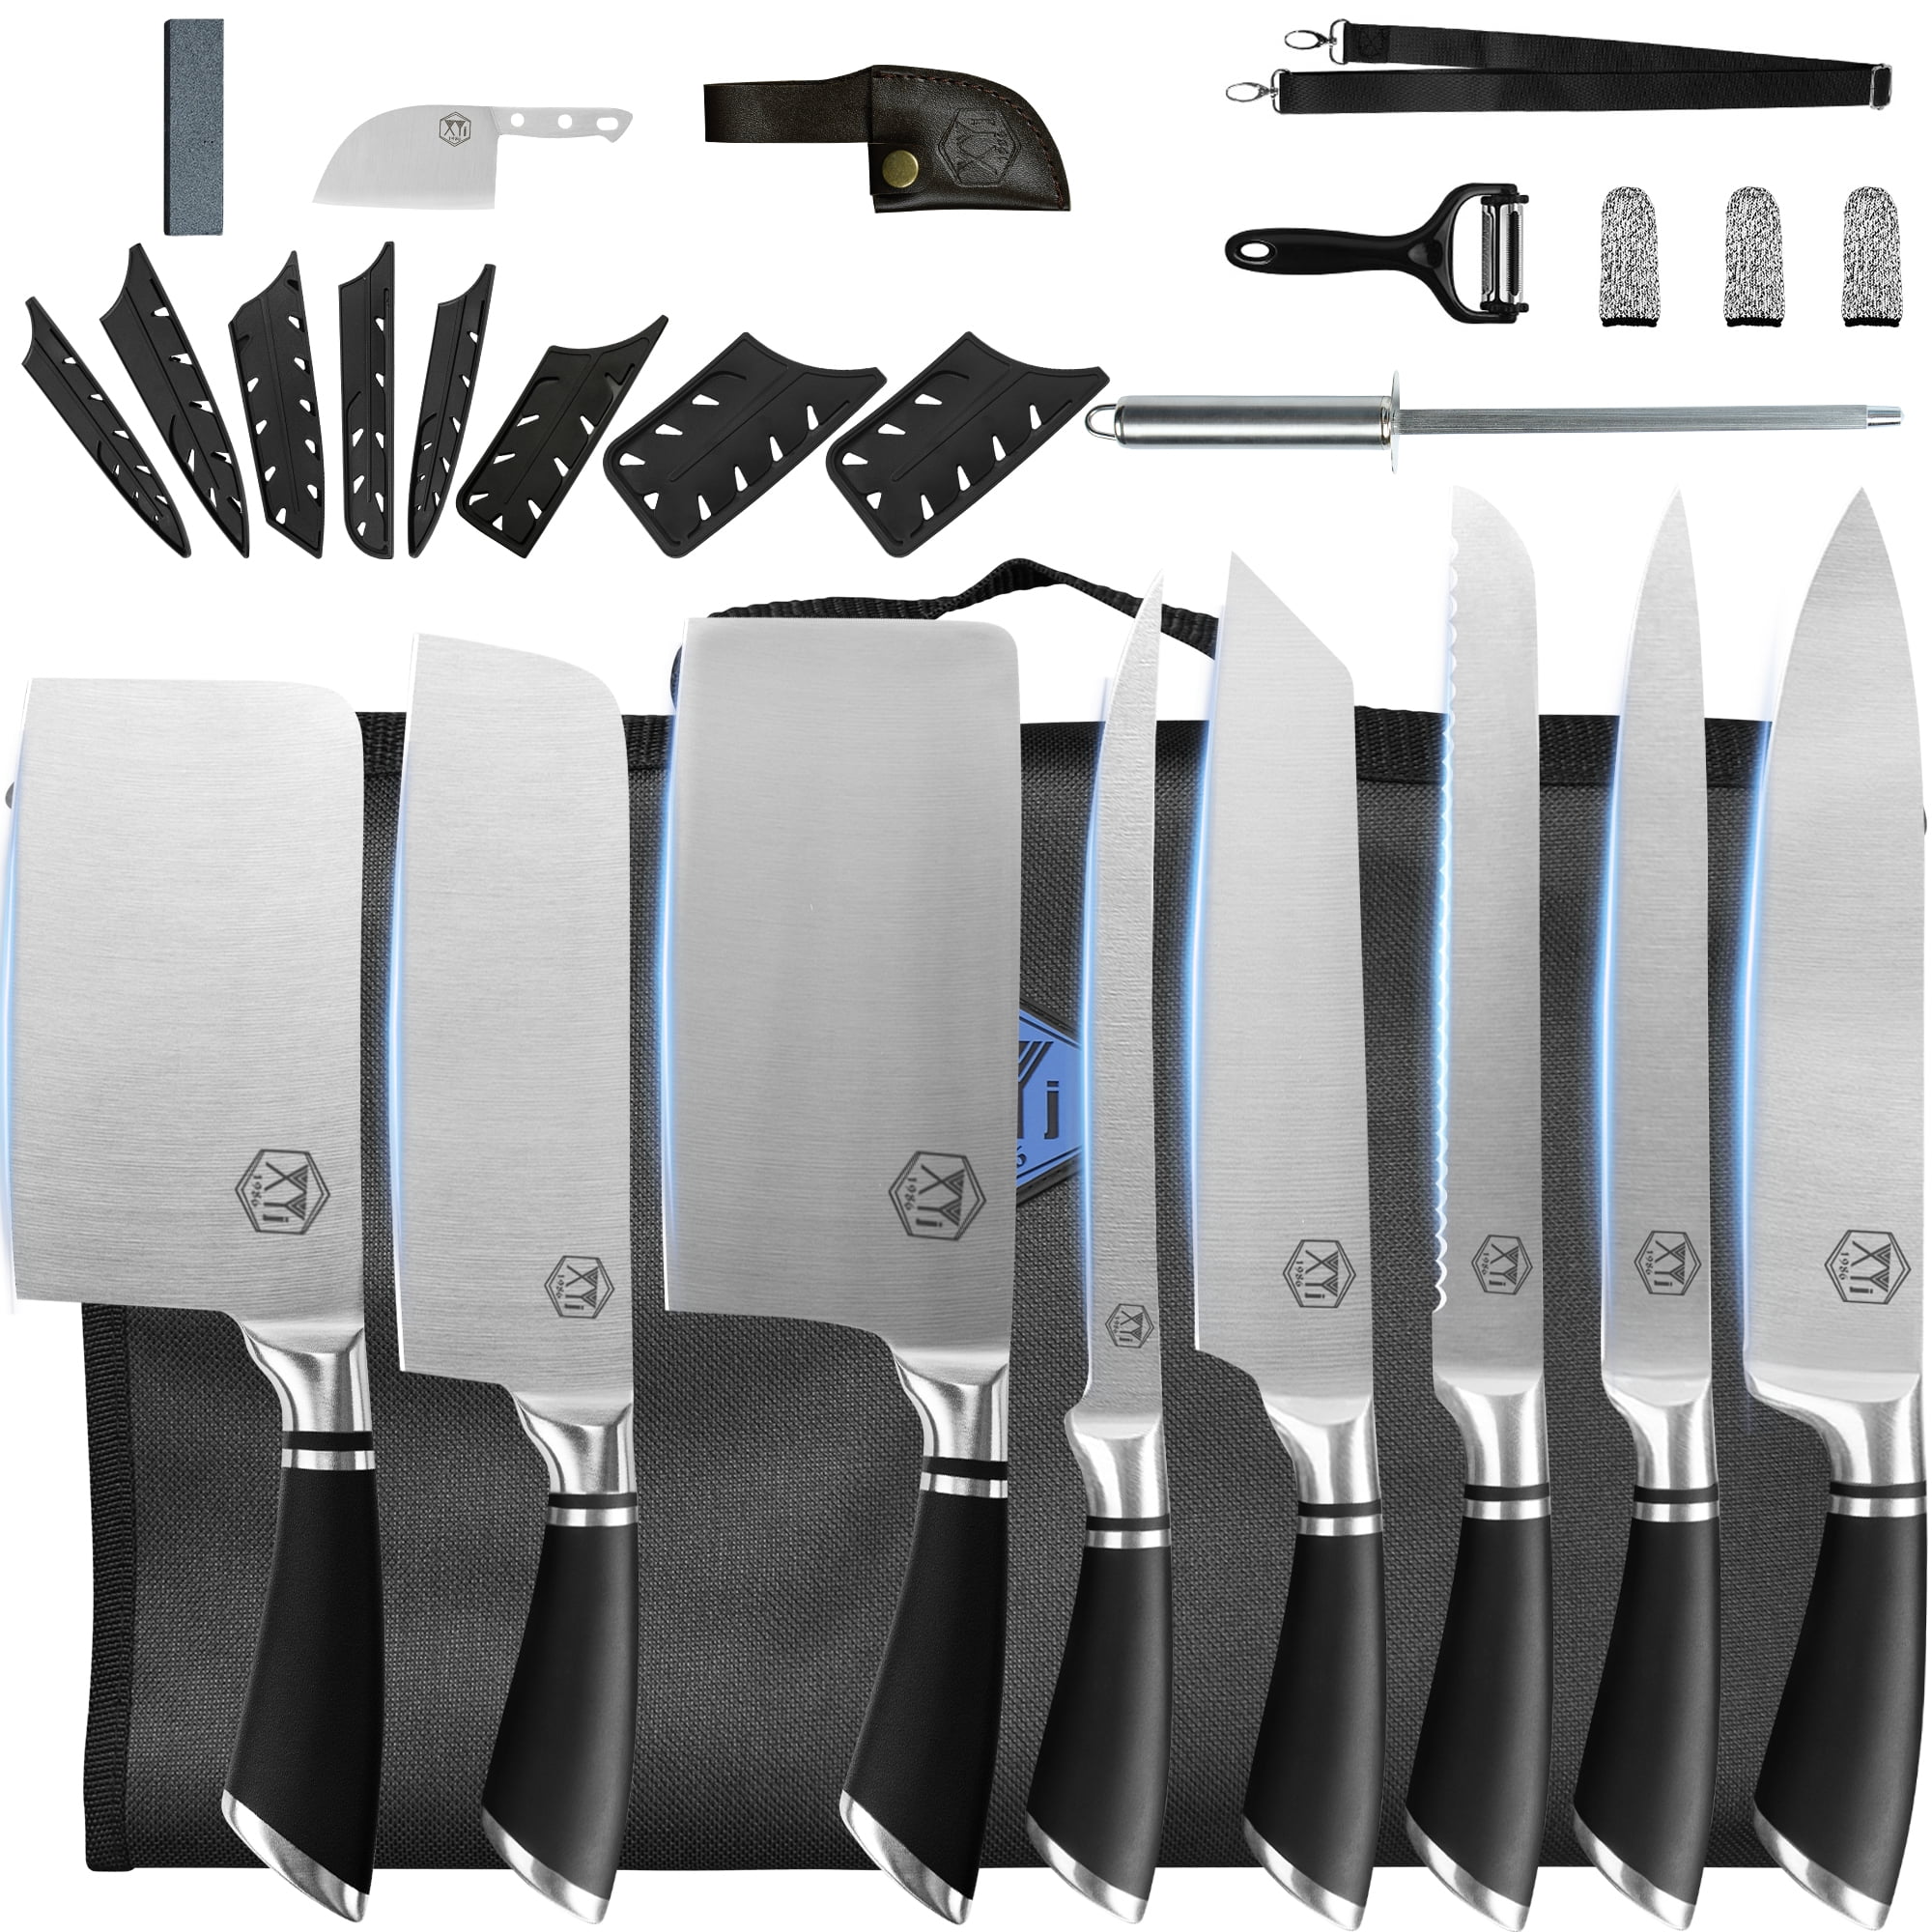 XYJ Professional Knife Sets for Master Chefs knife set,Kitchen Knife Set  with Bag,Cover,Scissors,Culinary Chef Butcher Cleaver,Cooking